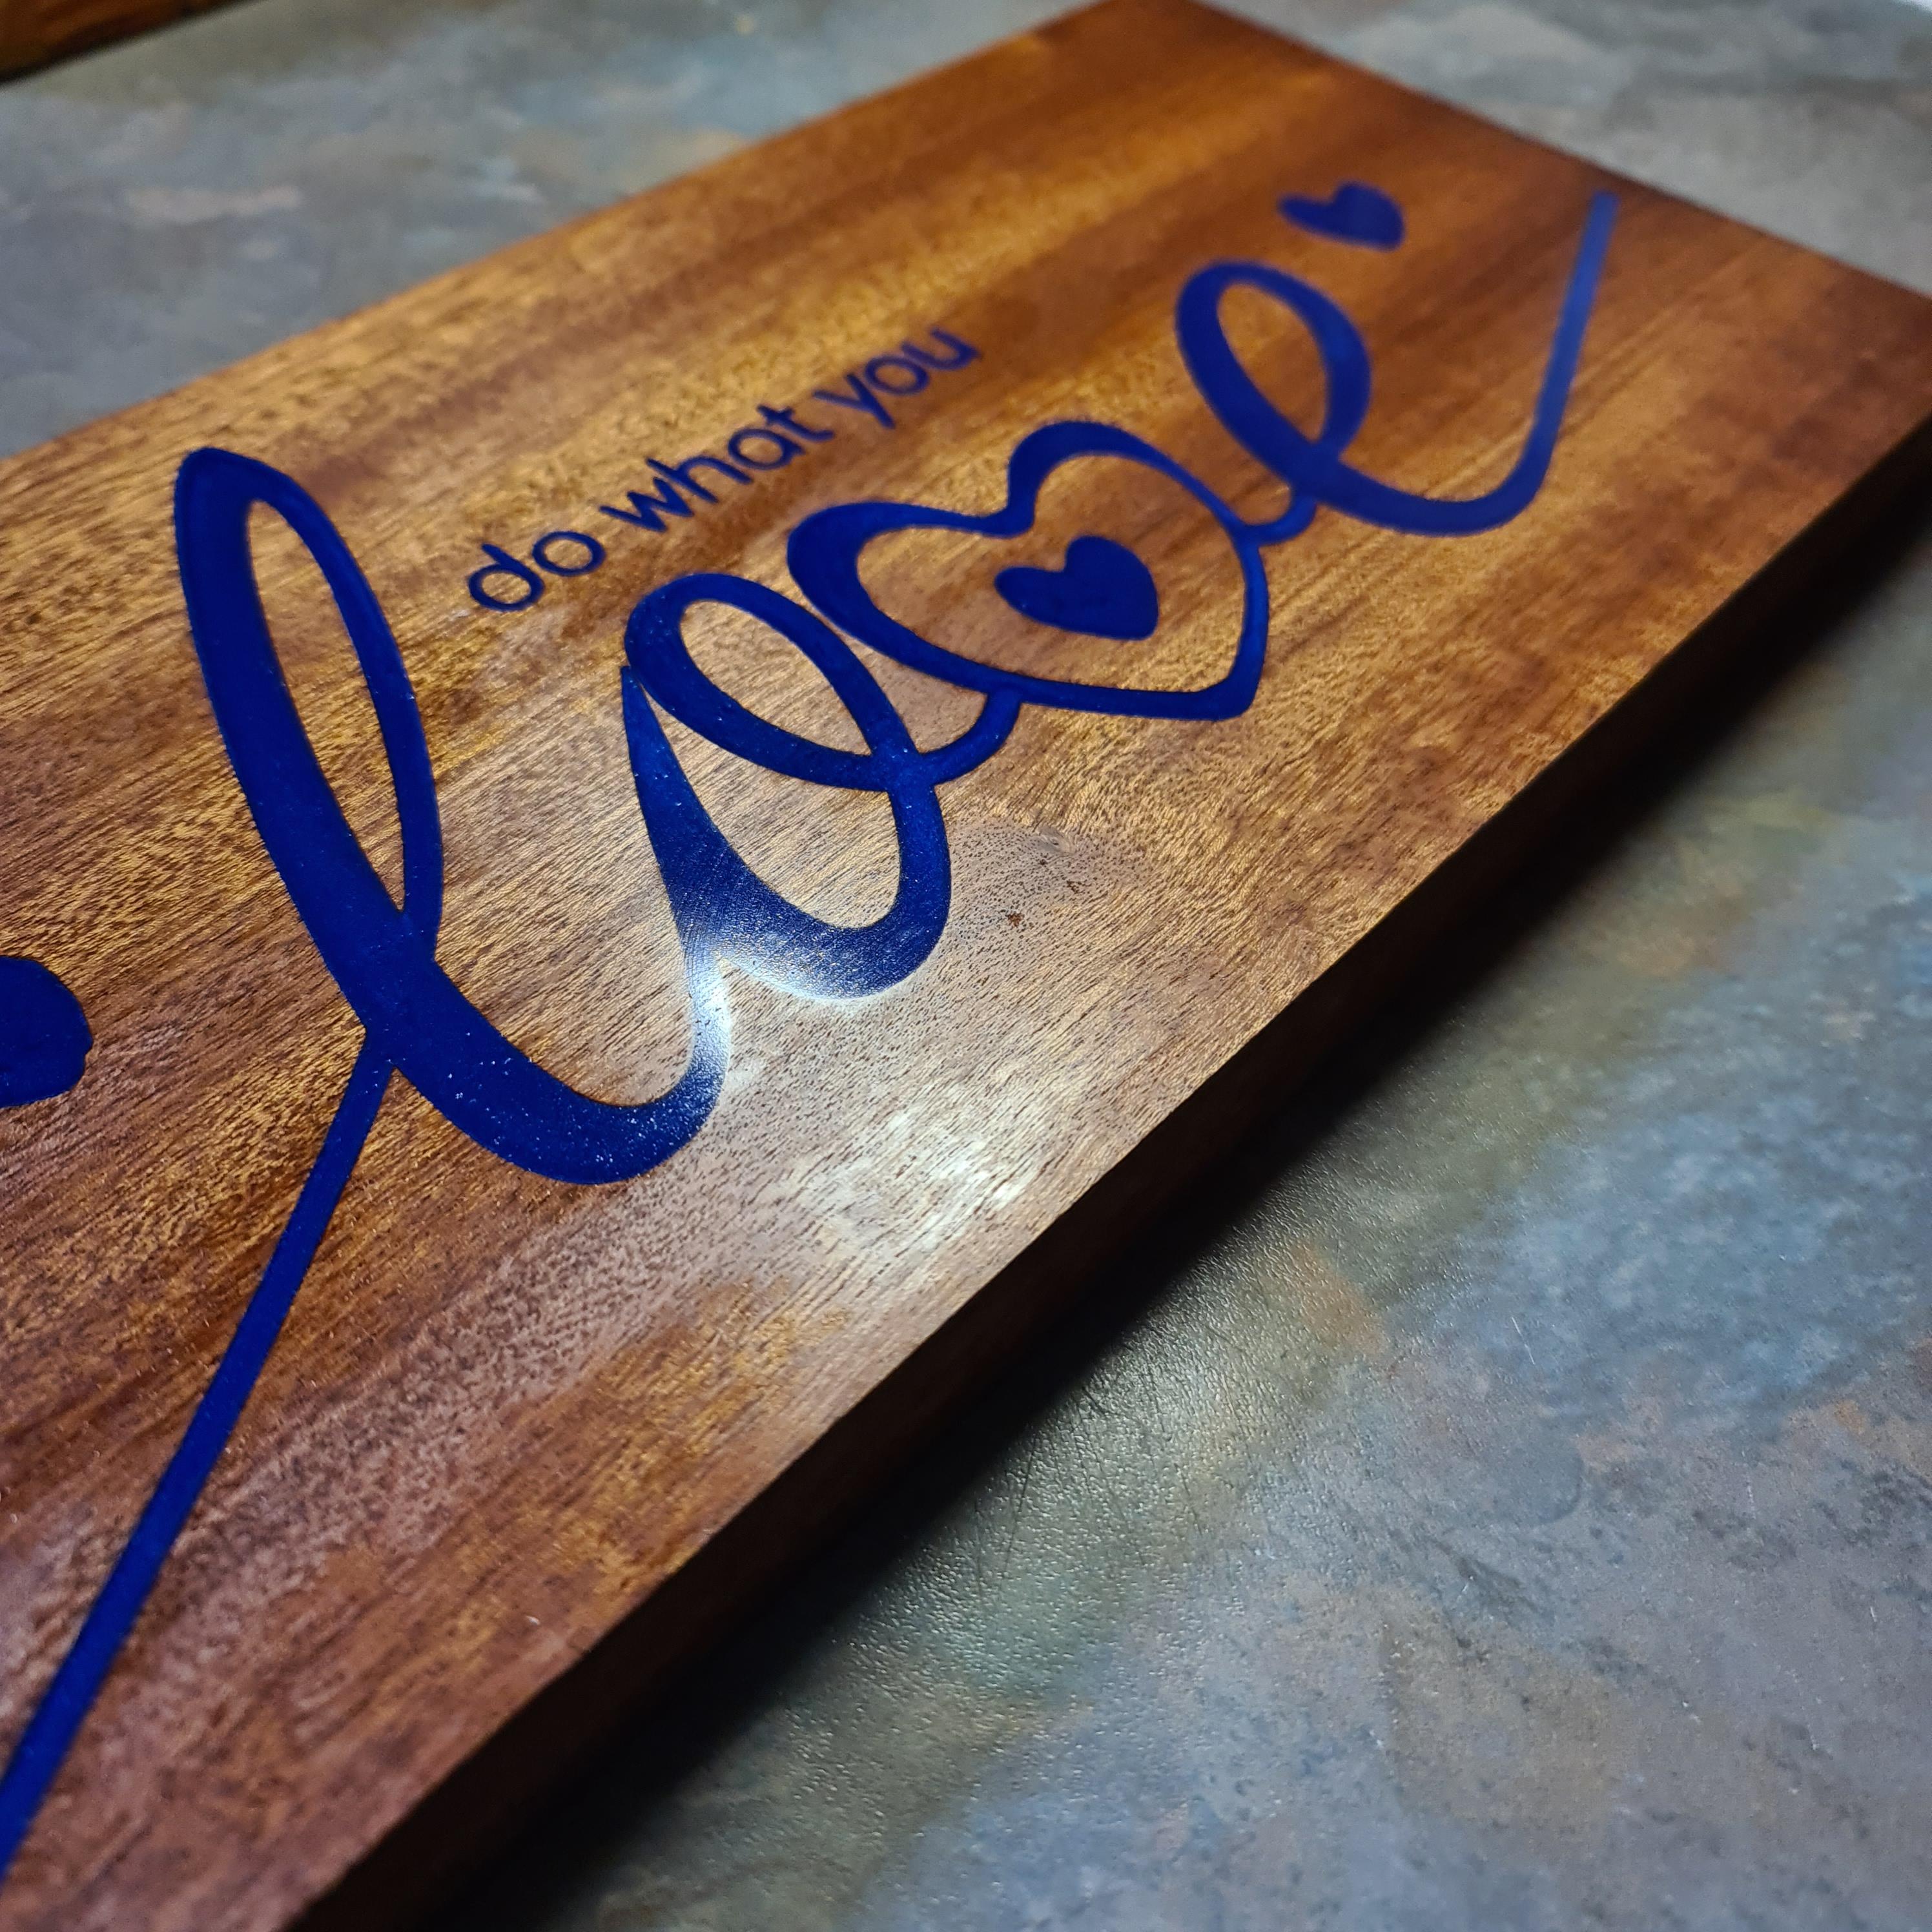 Engraved Wood and Resin Signs: Wisteria Woodcraft